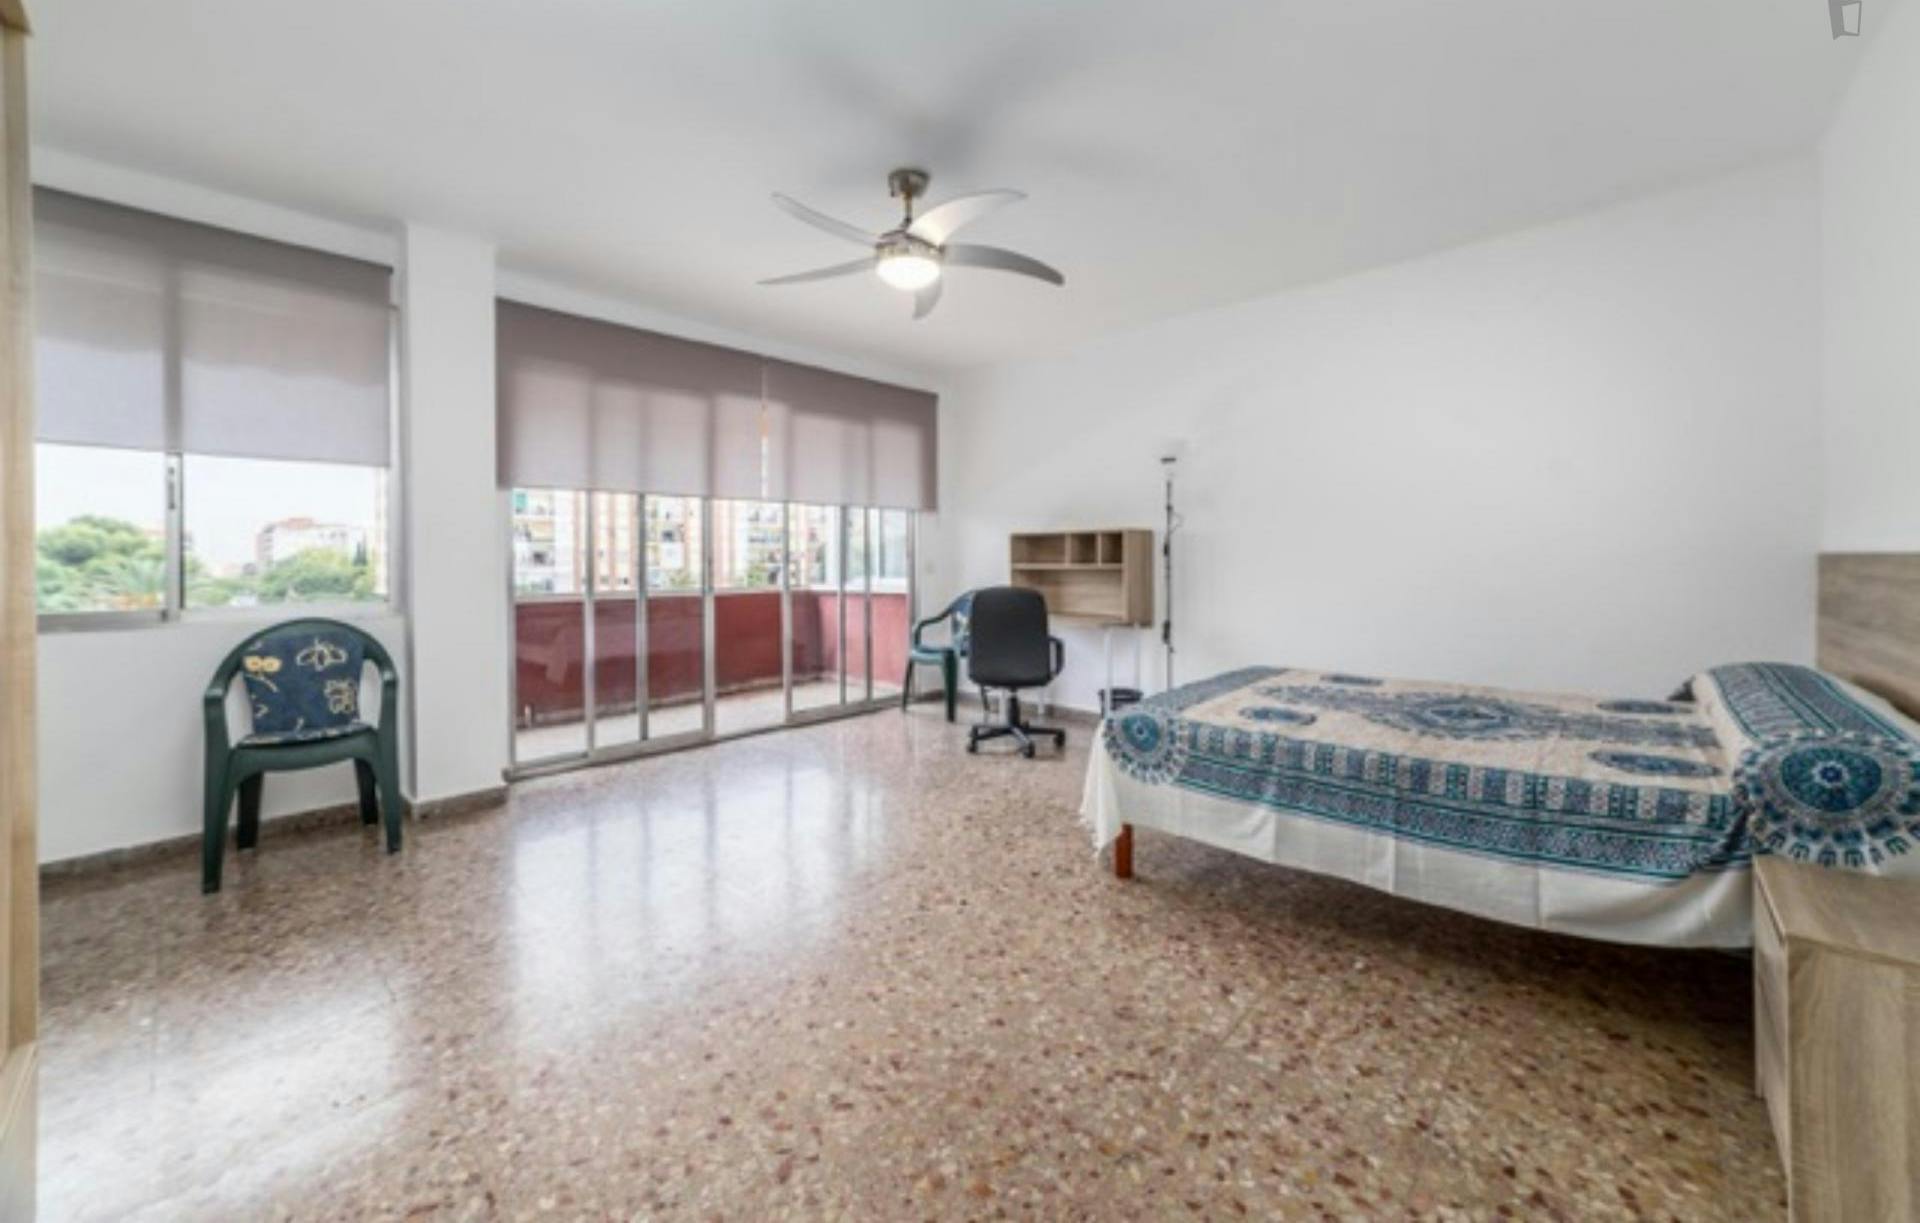 Cool double bedroom with a balcony not far from San Vicente Mártir Catholic University of Valencia